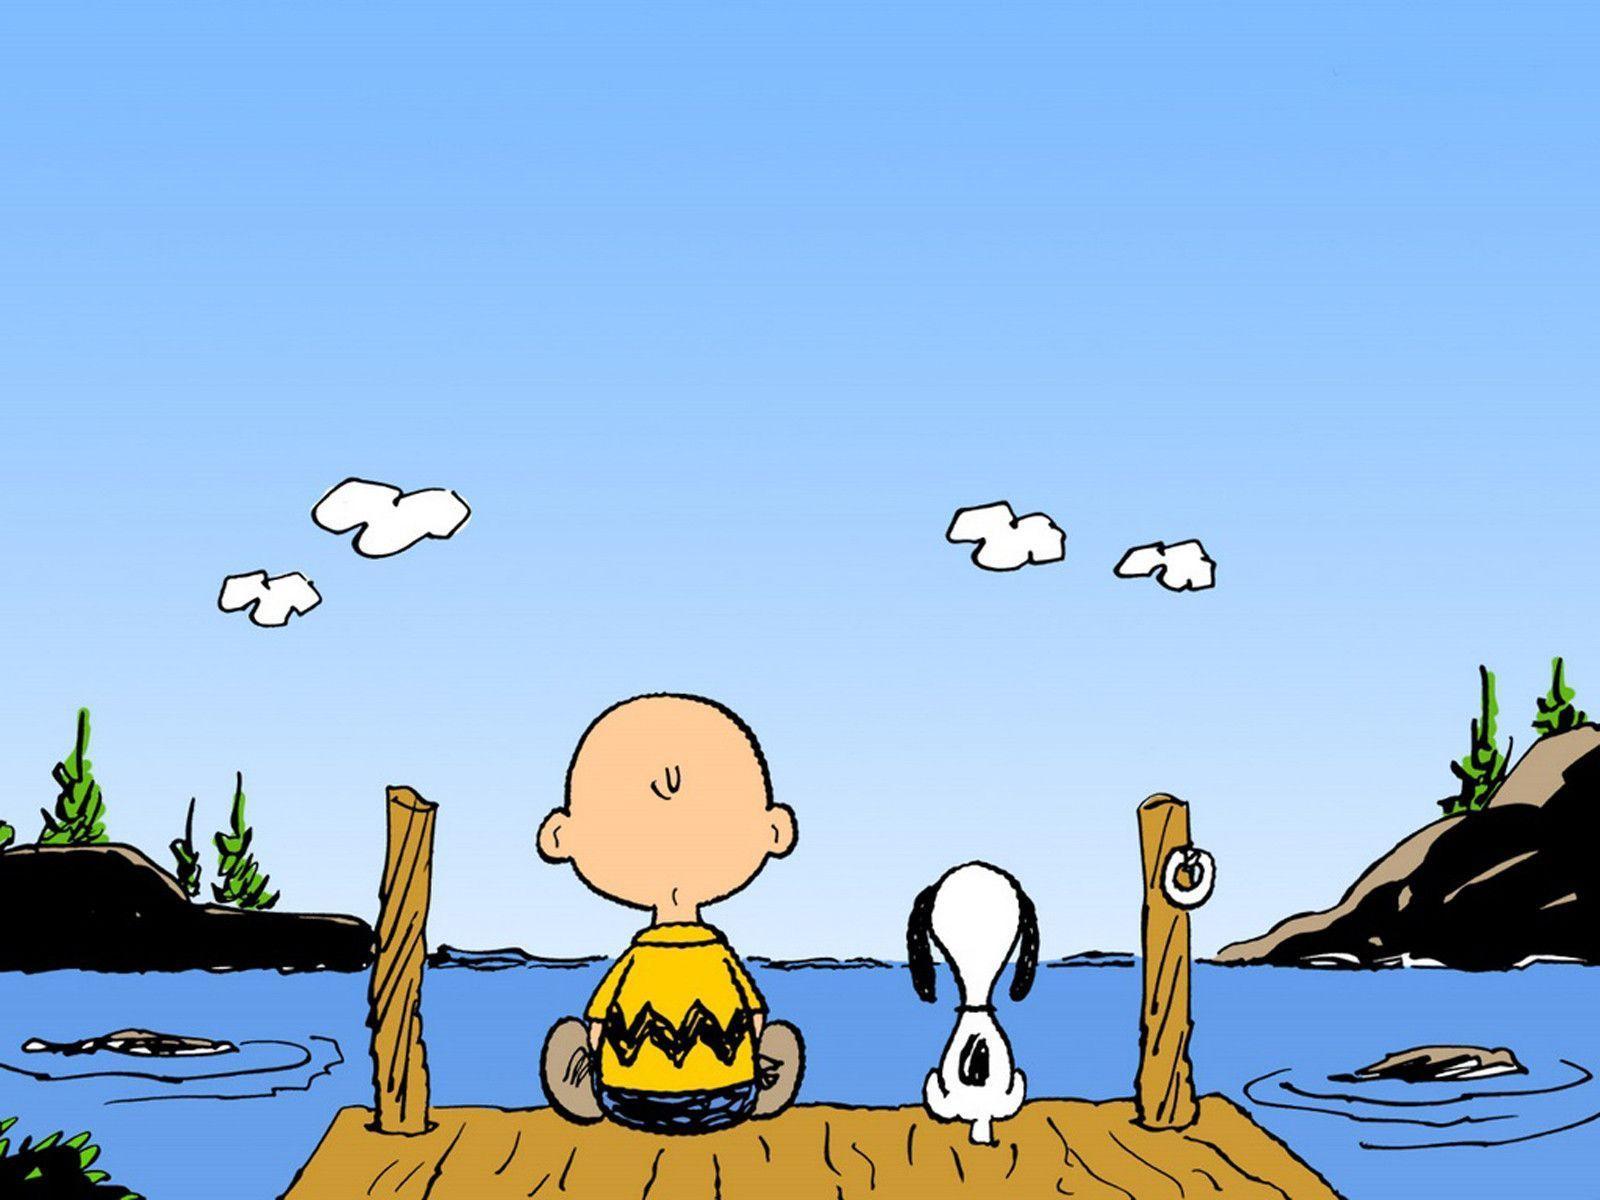 Snoopy and Charlie Brown Wallpaper Free Snoopy and Charlie Brown Background